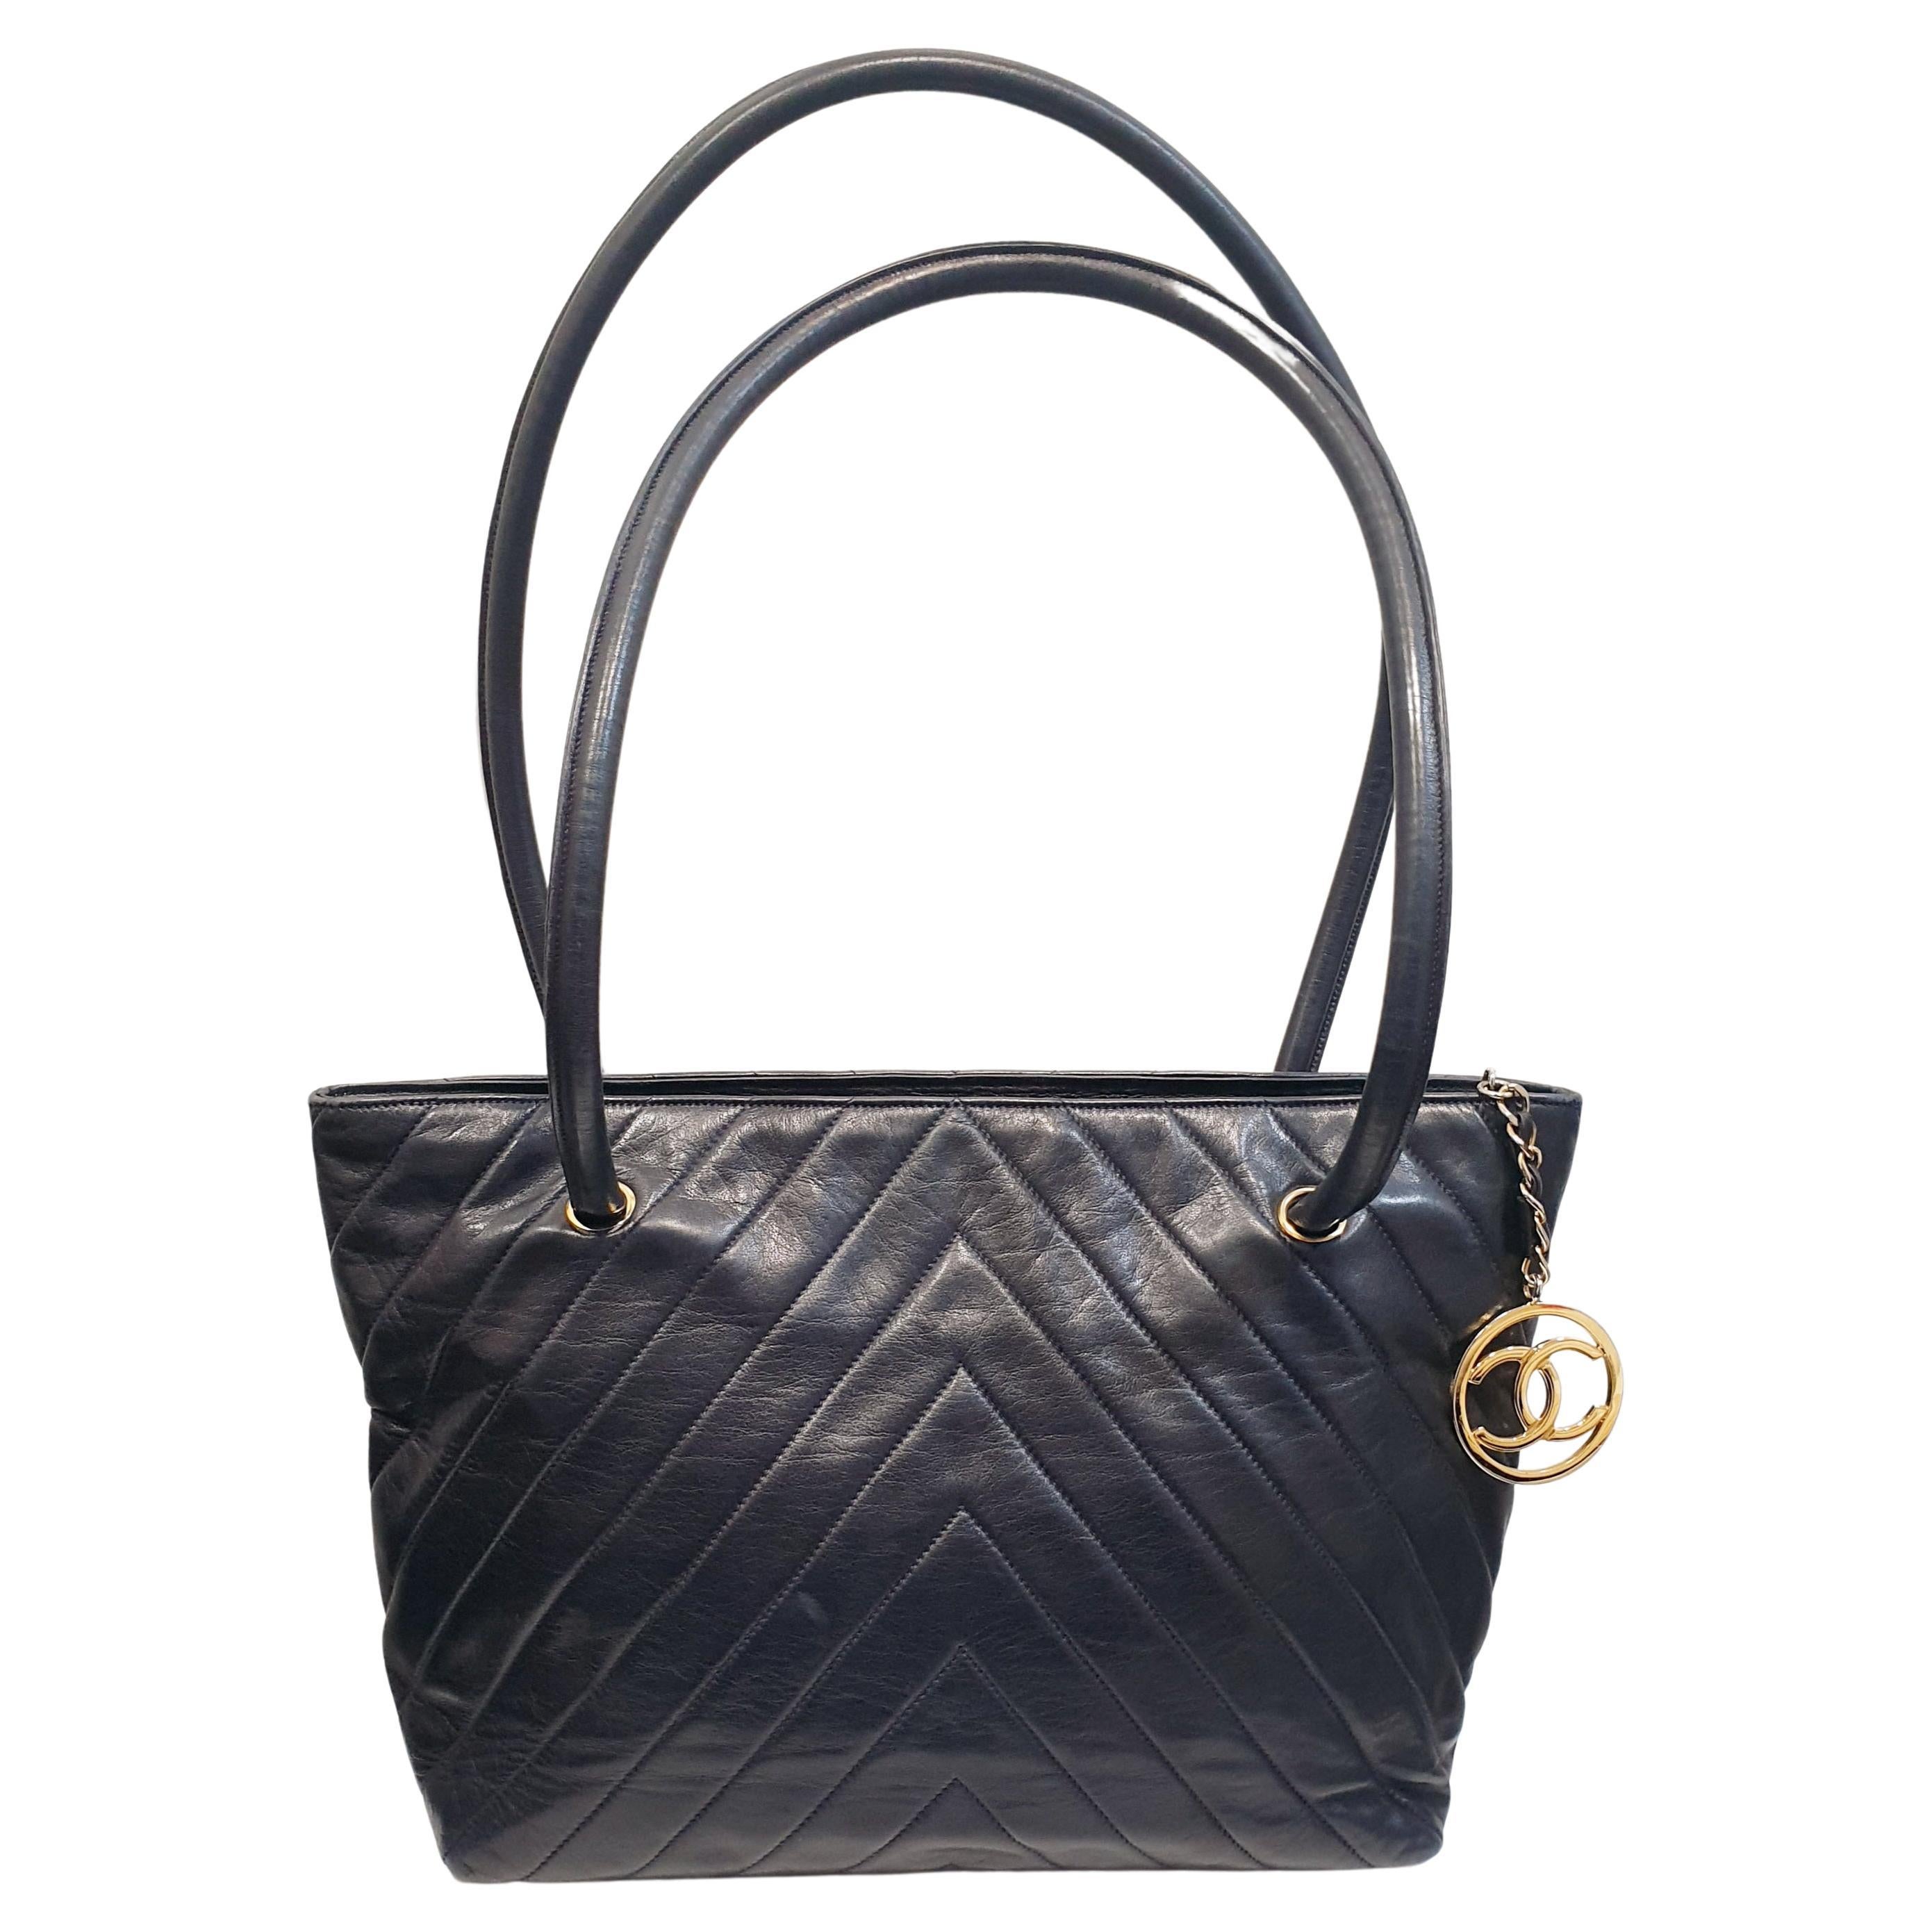 Vintage Chanel Dark Blue Leather Quilted Chevron Large Tote Bag at